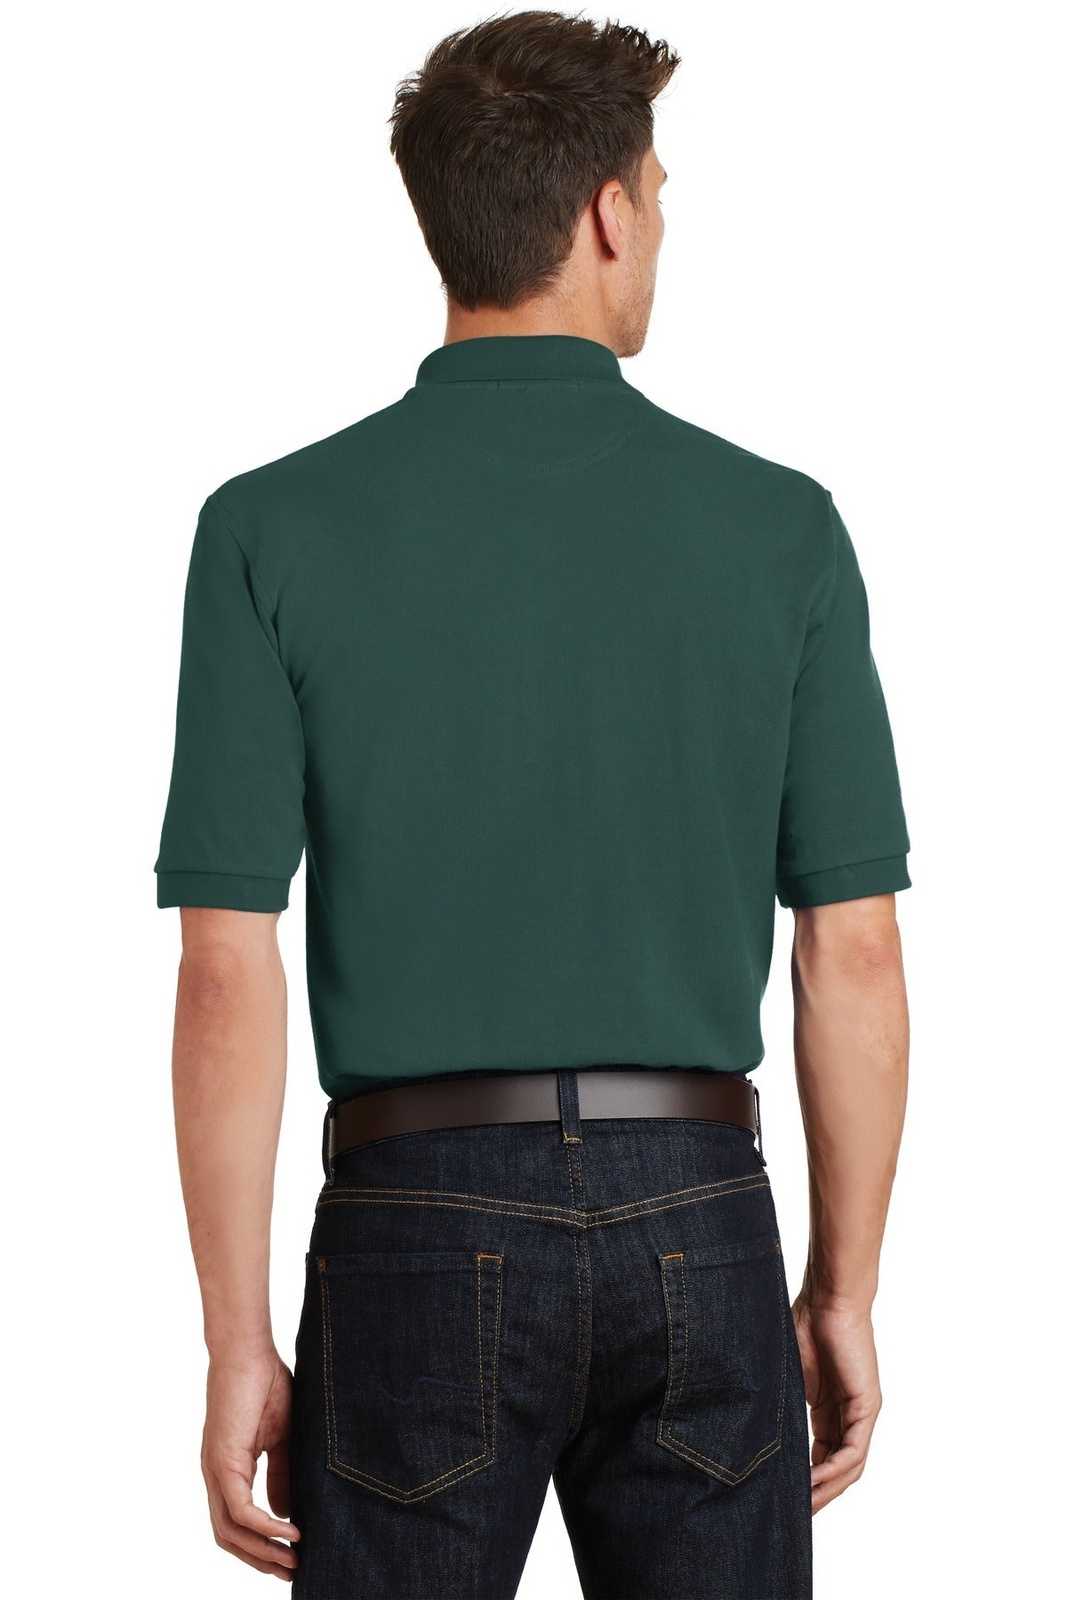 Port Authority K420P Heavyweight Cotton Pique Polo with Pocket - Dark Green - HIT a Double - 2